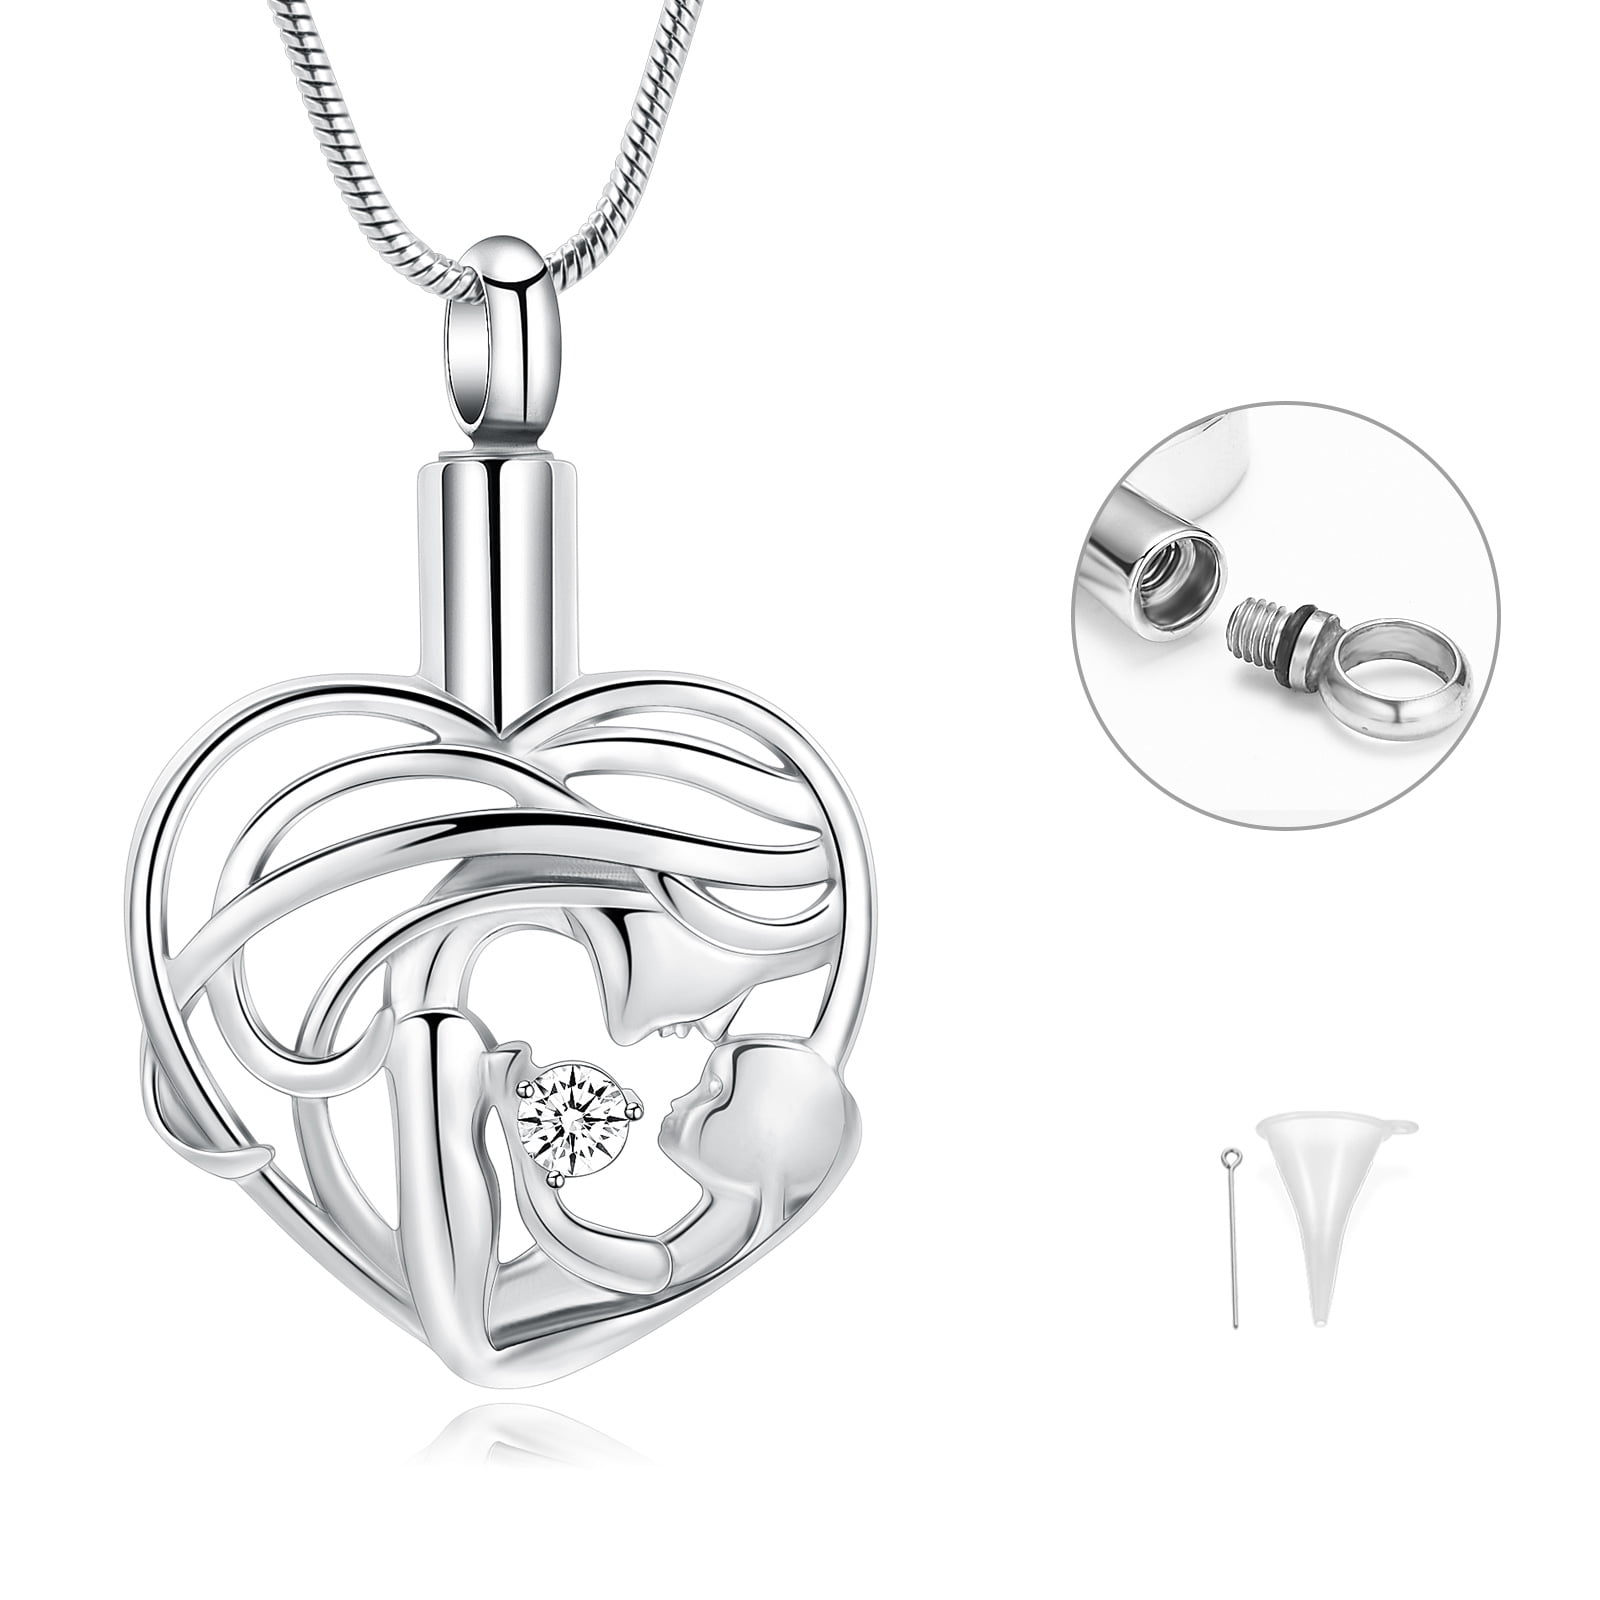 Stainless Steel Cremation Urn Pendant Heart-Mom with Chain in Ludlow, MA |  Heavenly Inspirations Flowers & Gifts